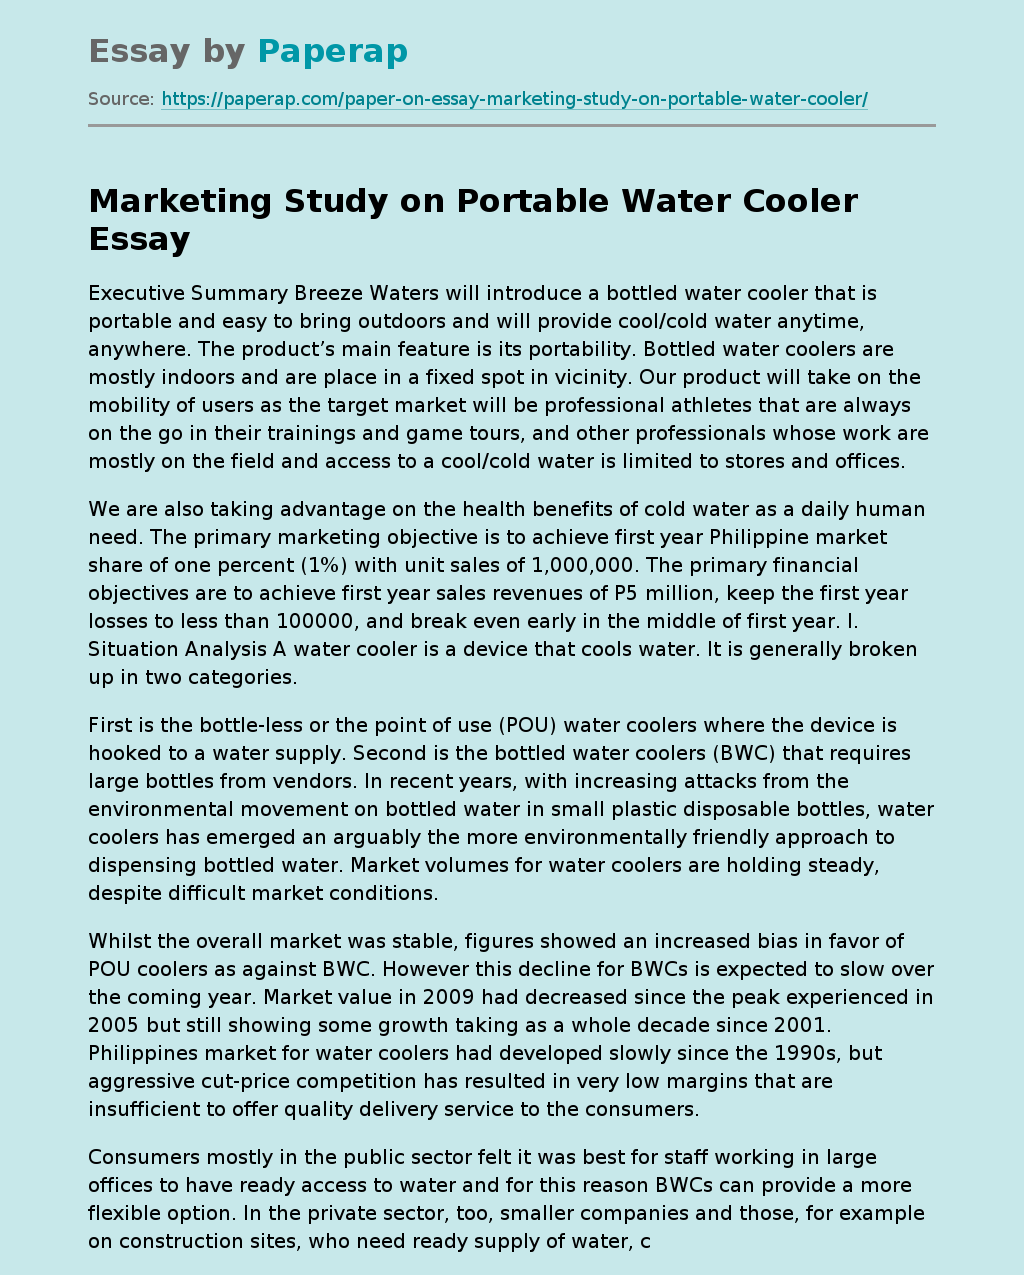 Marketing Study on Portable Water Cooler